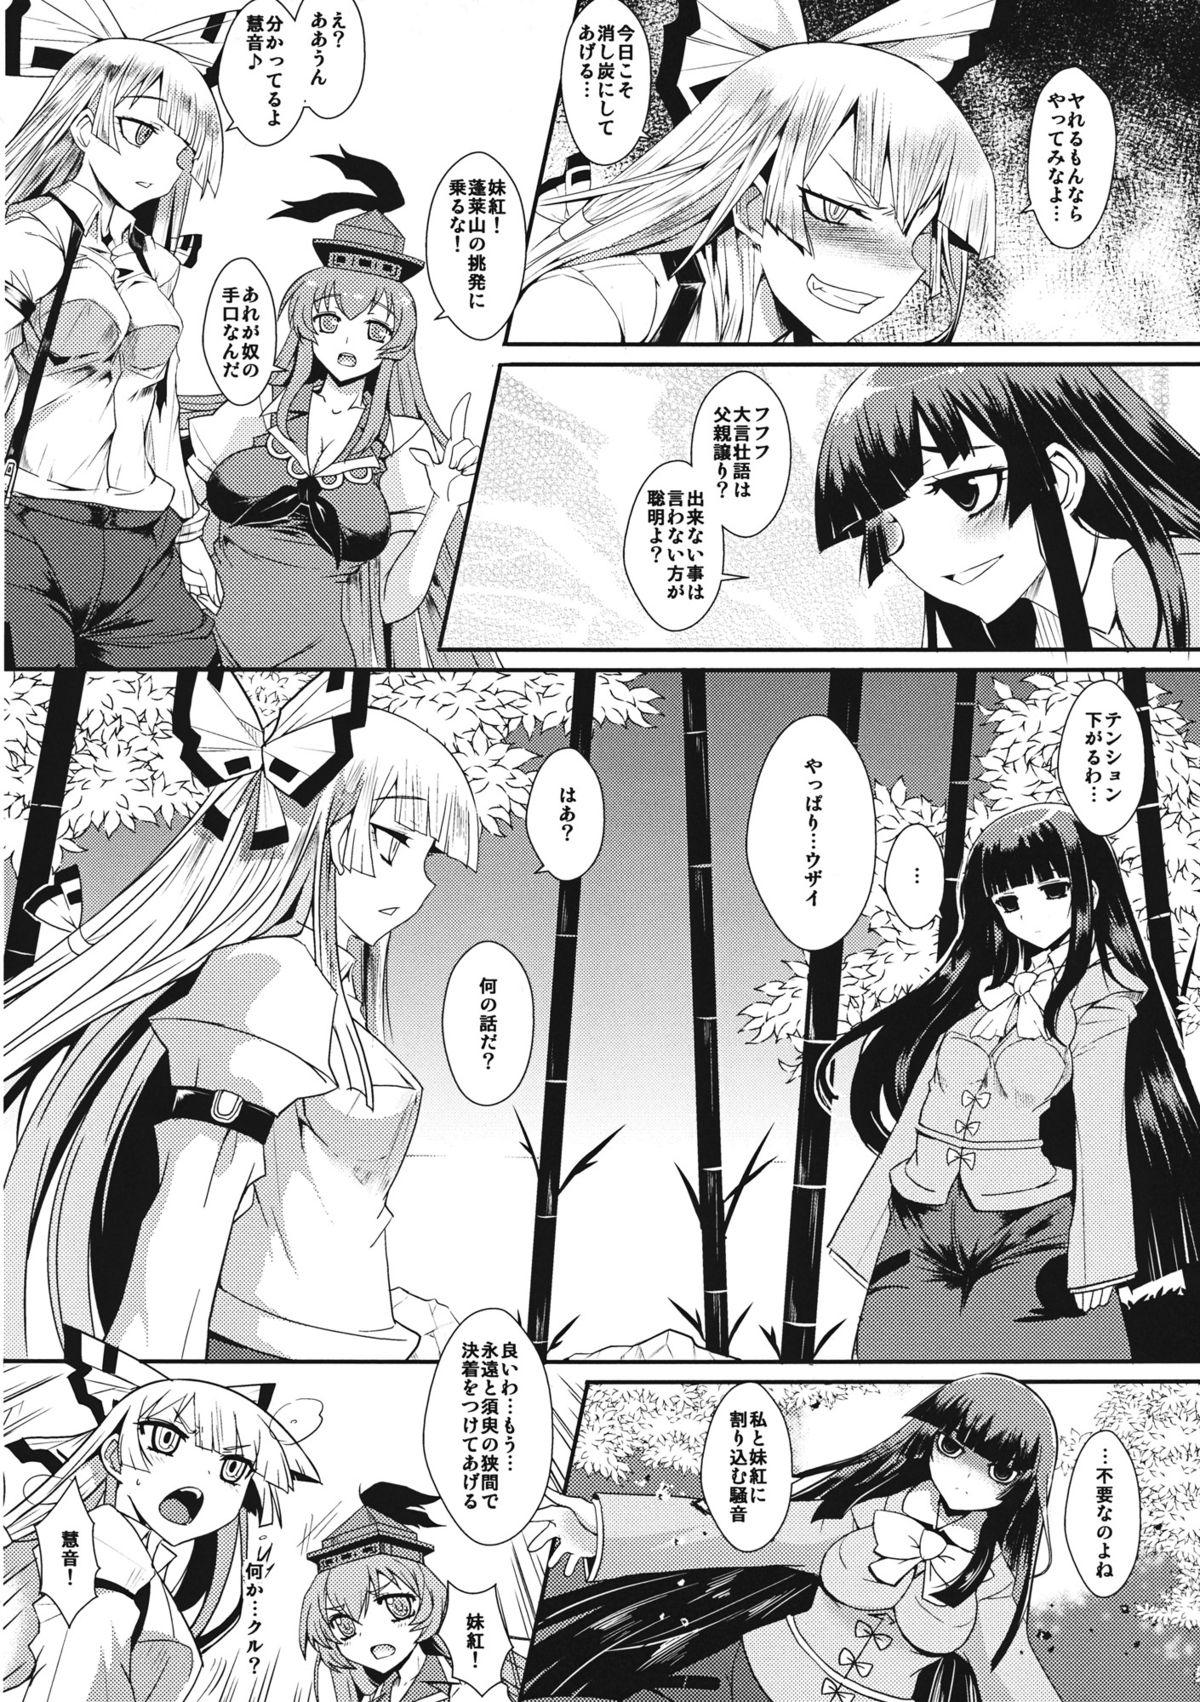 Livesex 紅月の二重奏 - Touhou project Gaystraight - Page 3